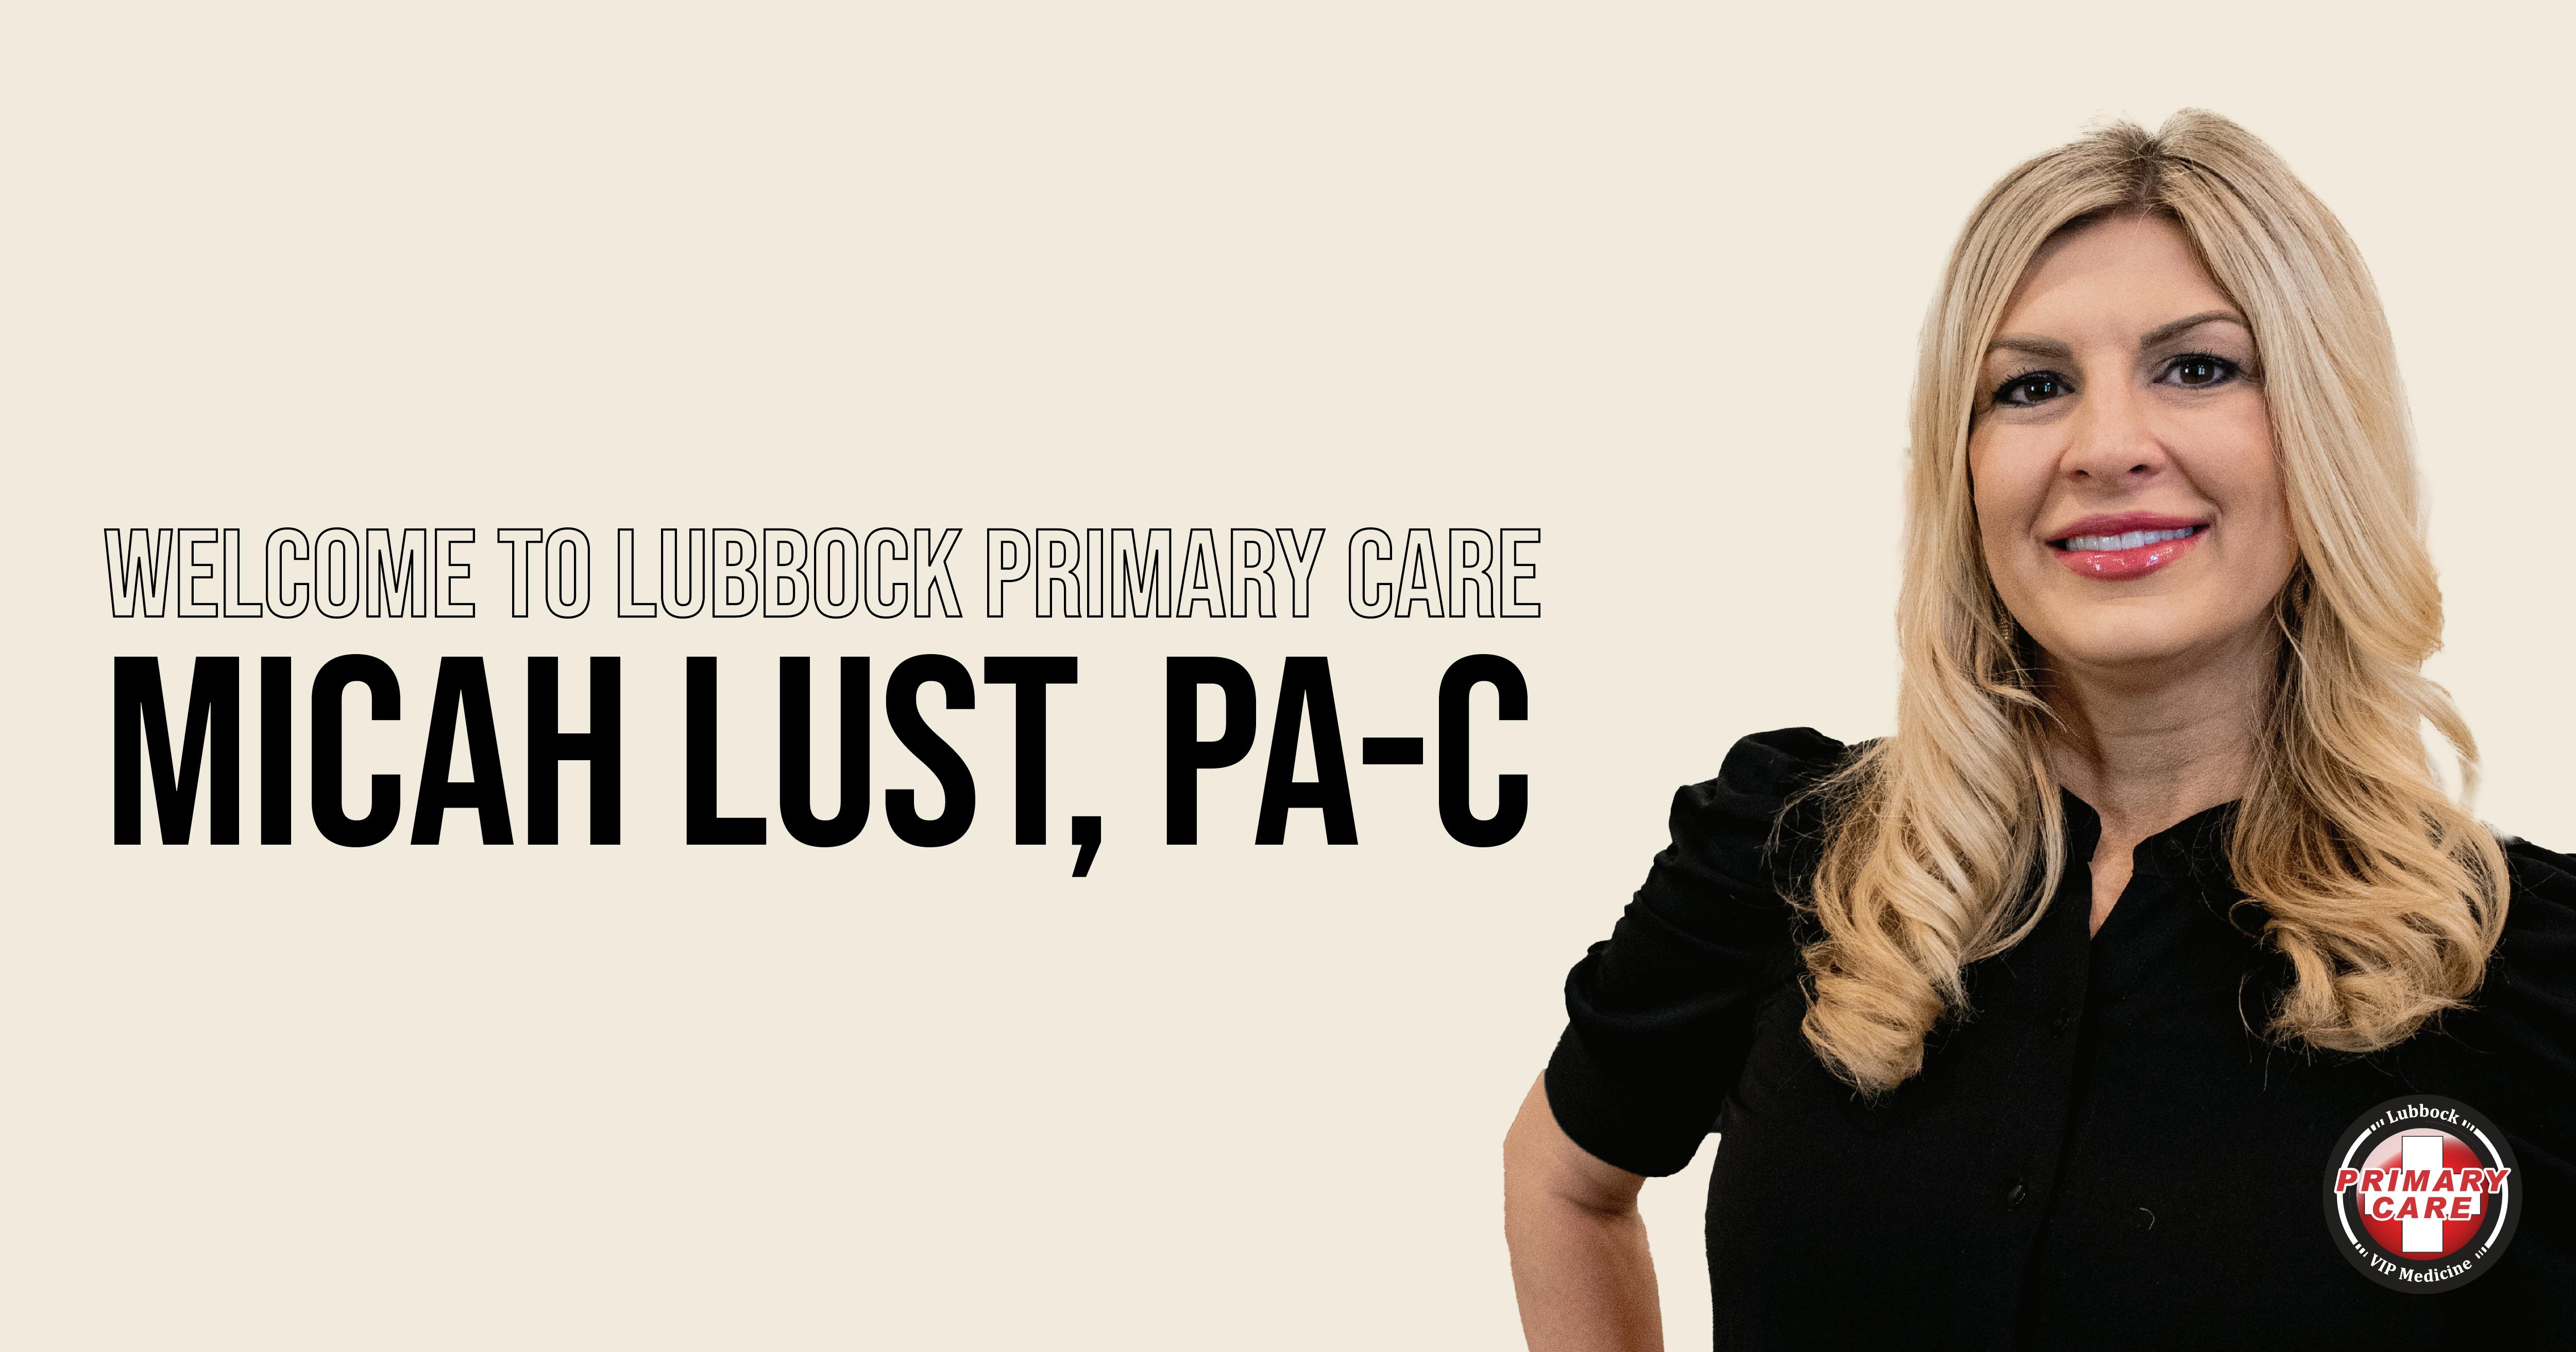 Welcome to Lubbock Primary Care: Micah Lust, PA-C